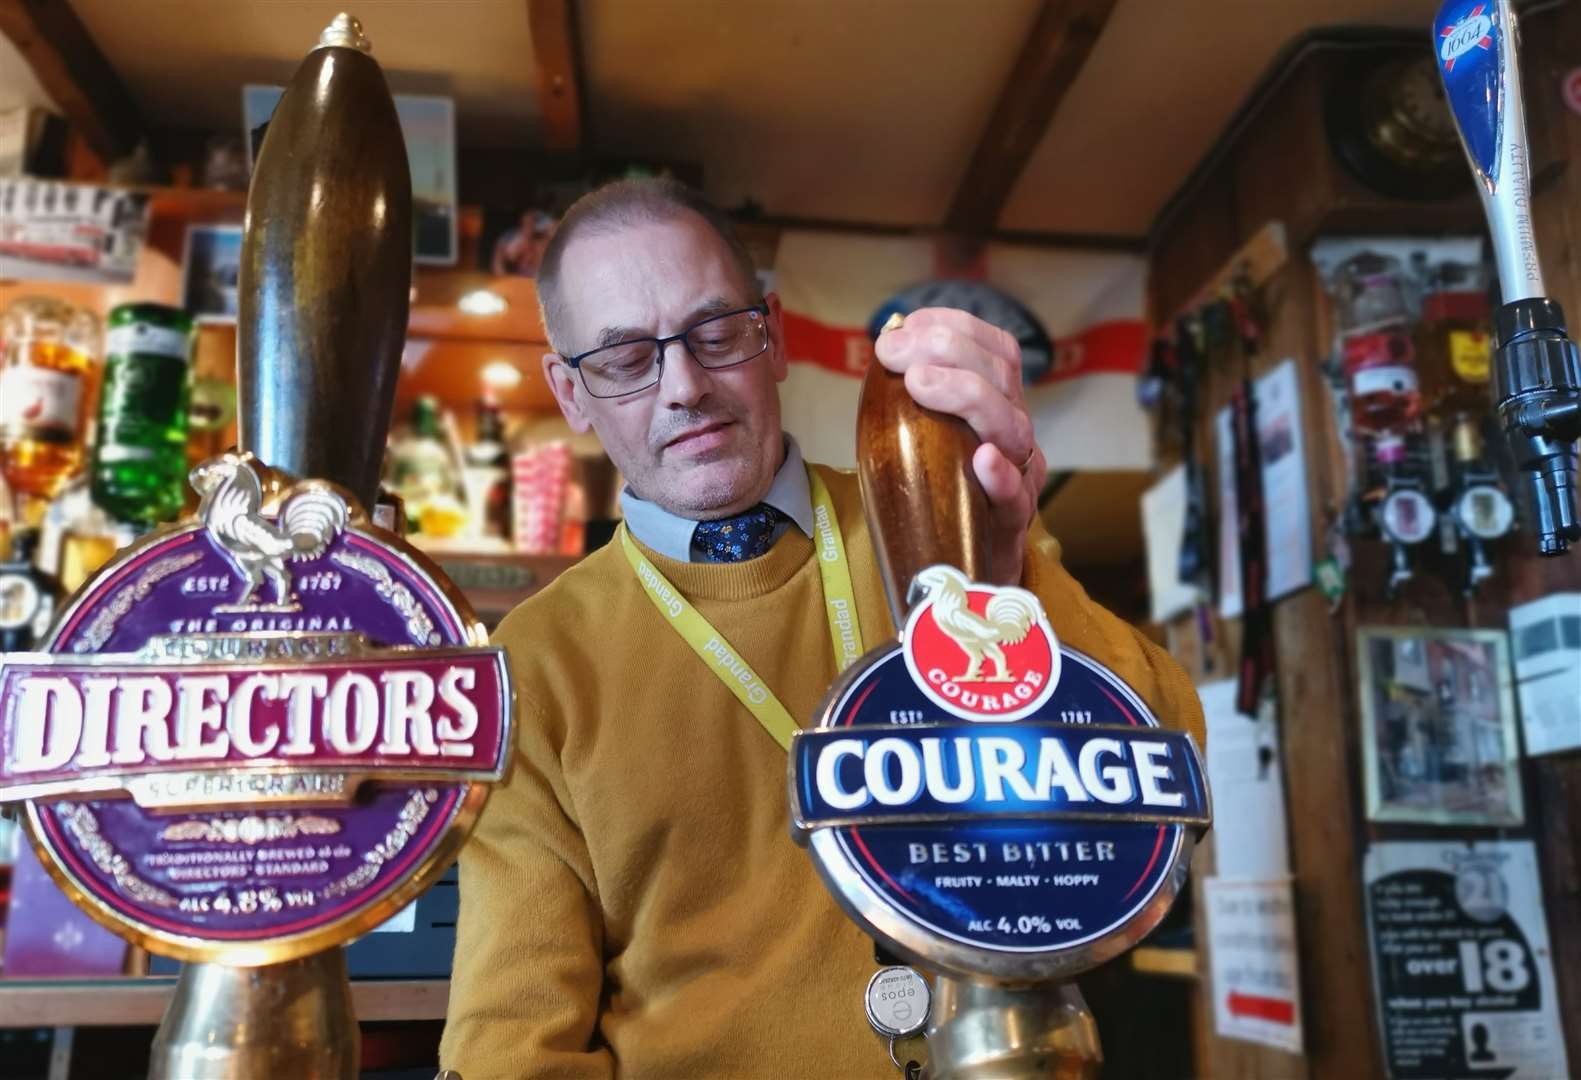 Nigel has been pouring pints in Margate for more than 30 years